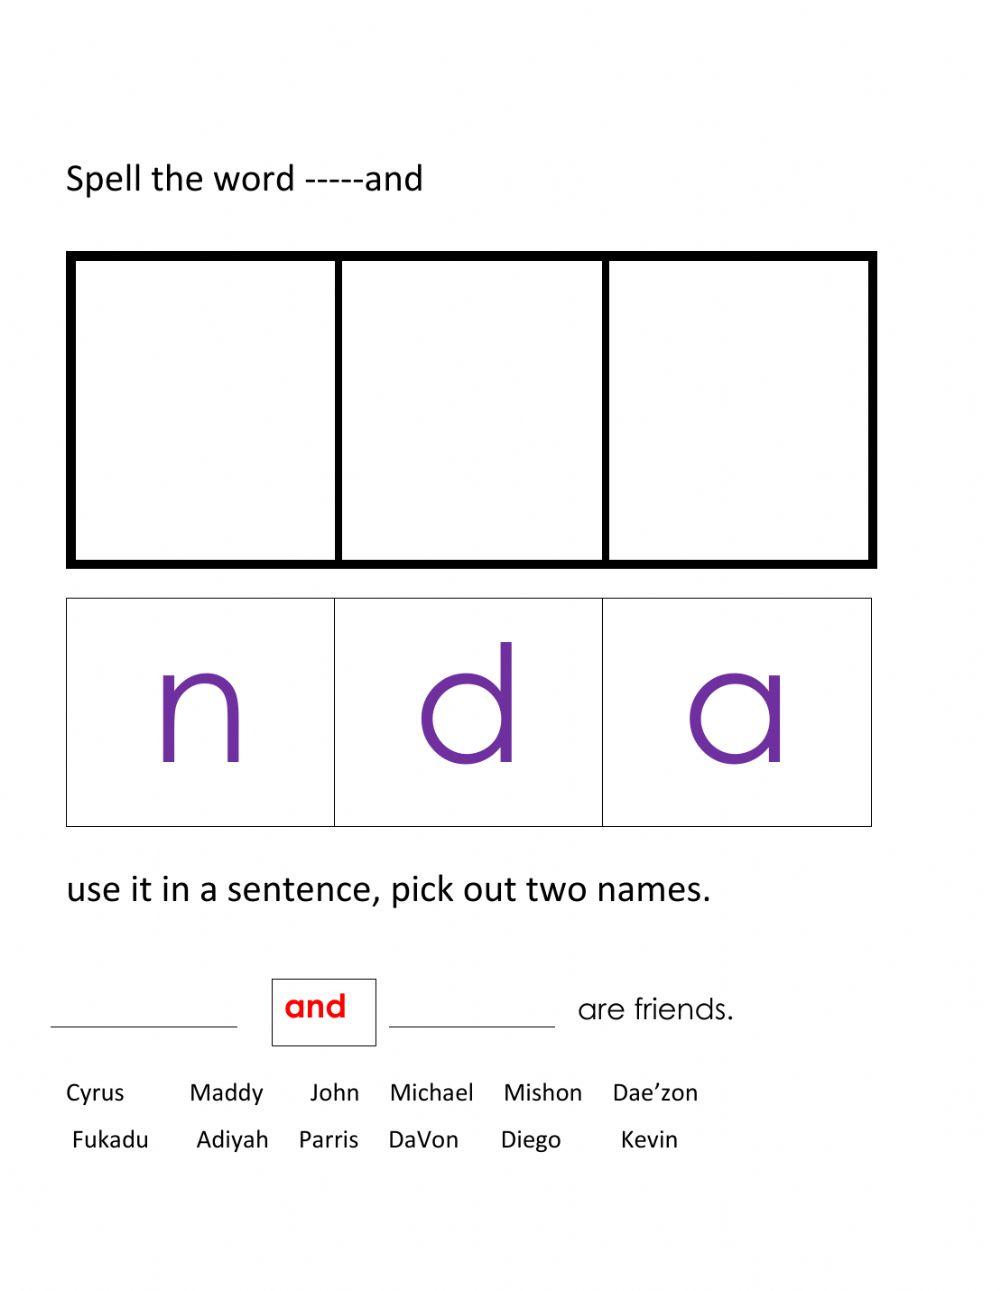 Sight word and